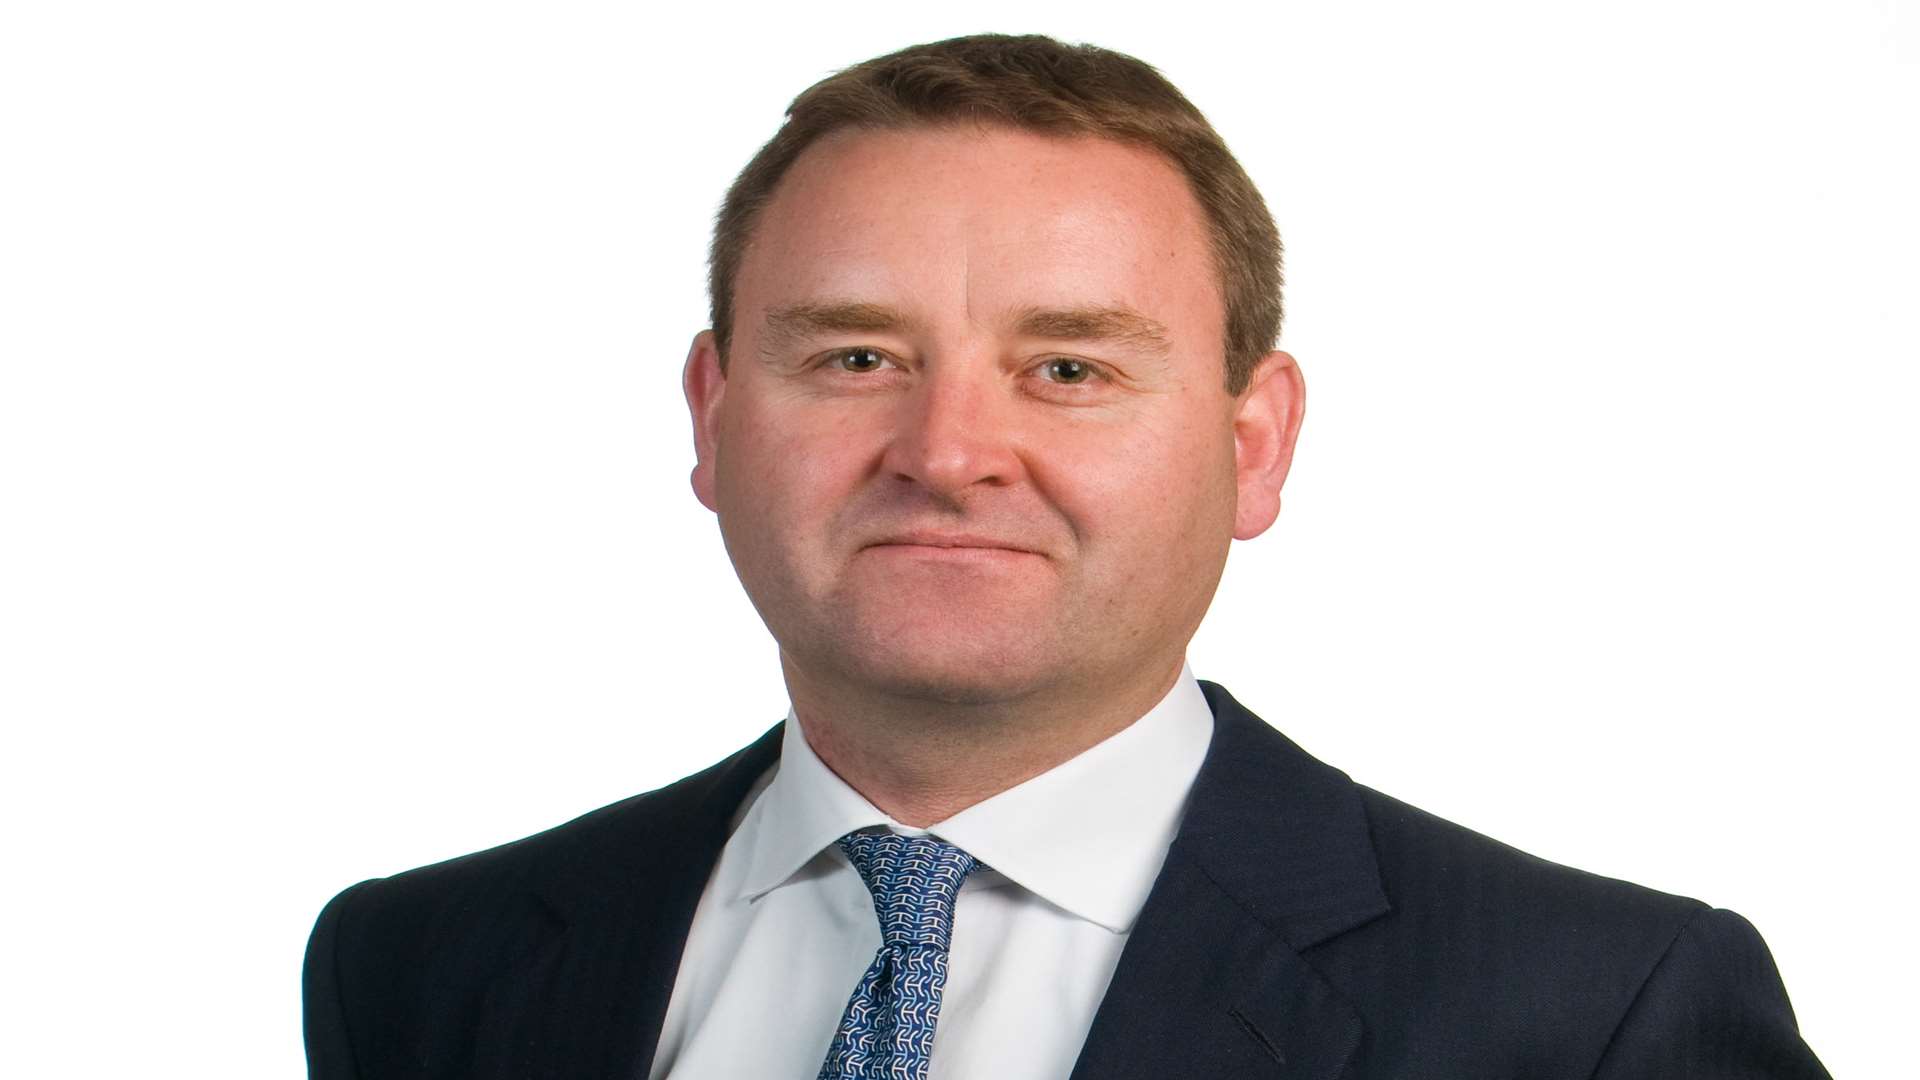 Rory Pope, investment director at BGF